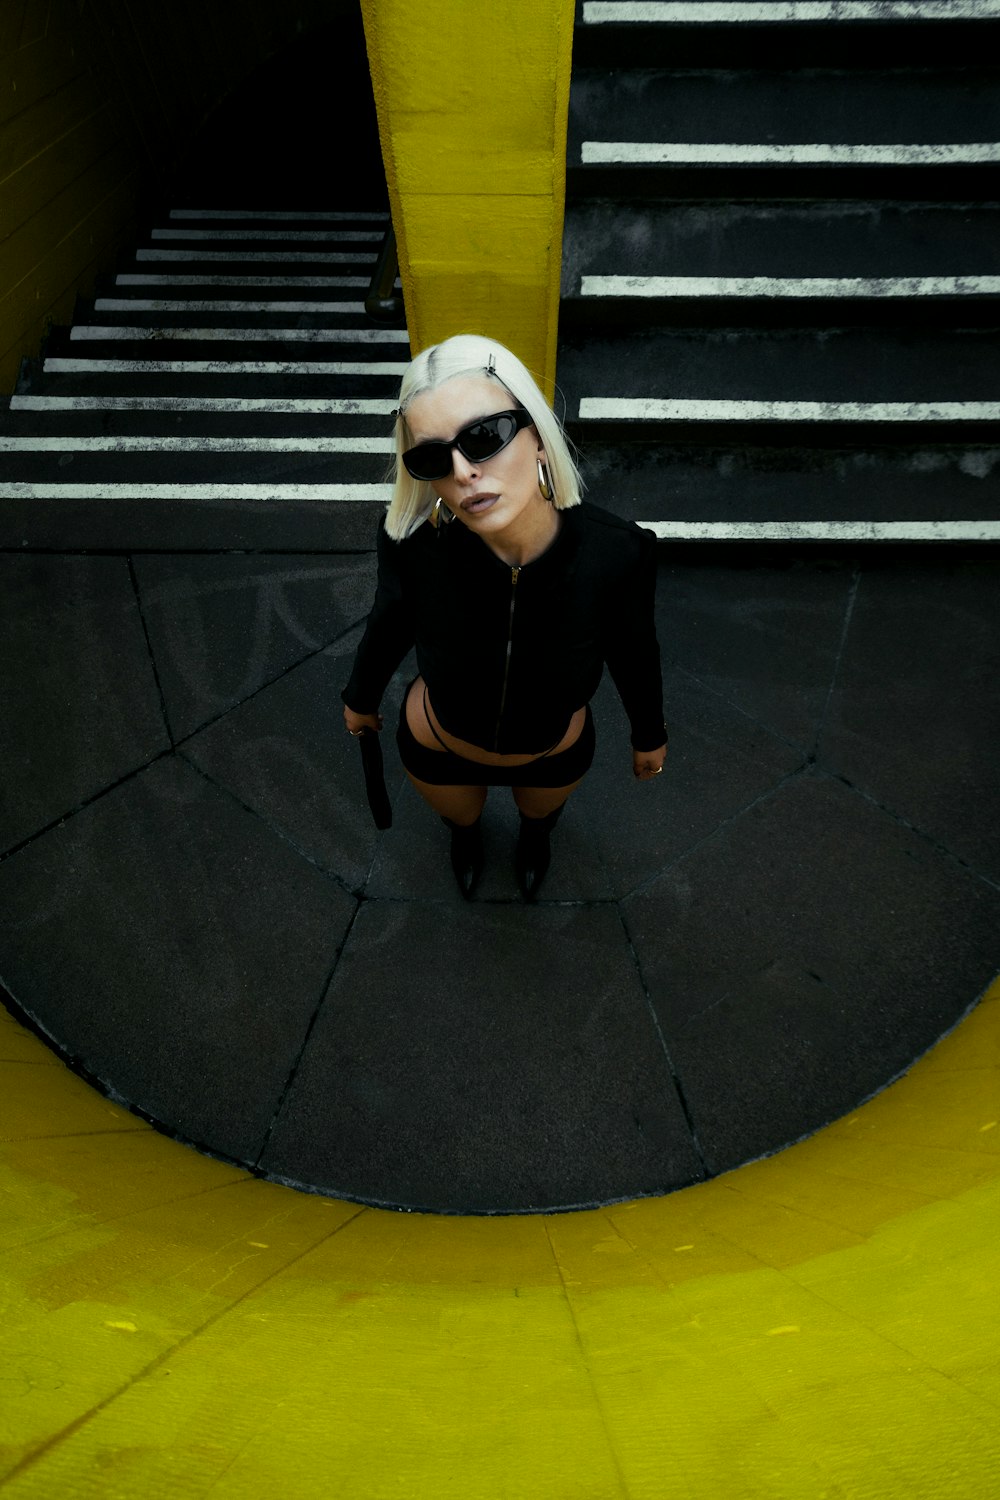 a woman in a black outfit and sunglasses